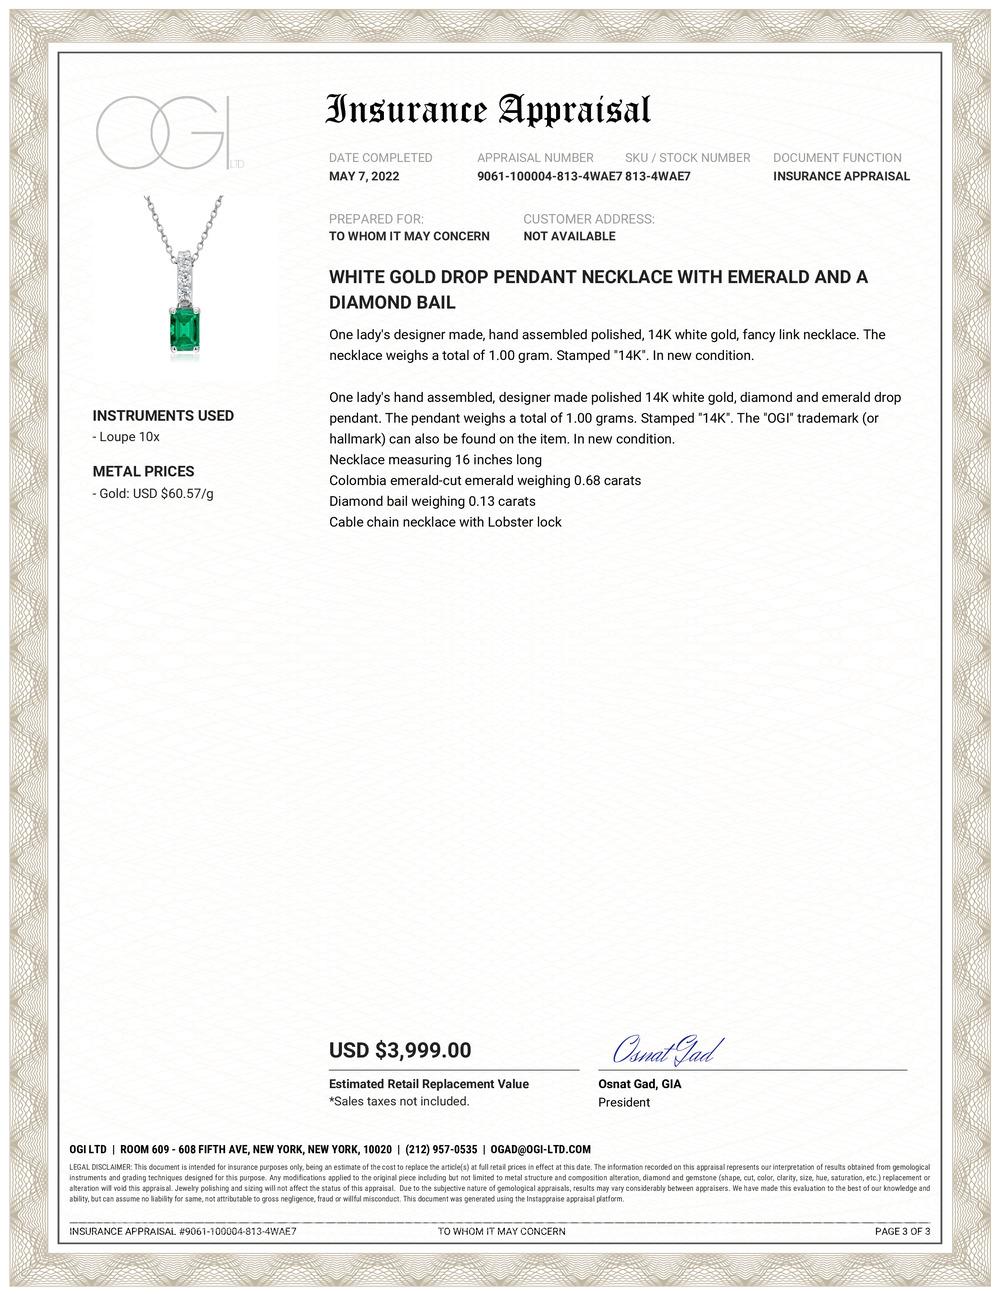 14 karats white gold necklace pendant with emerald-shaped emerald
Necklace measuring 16 inches long
Emerald and diamond pendant measuring 0.65